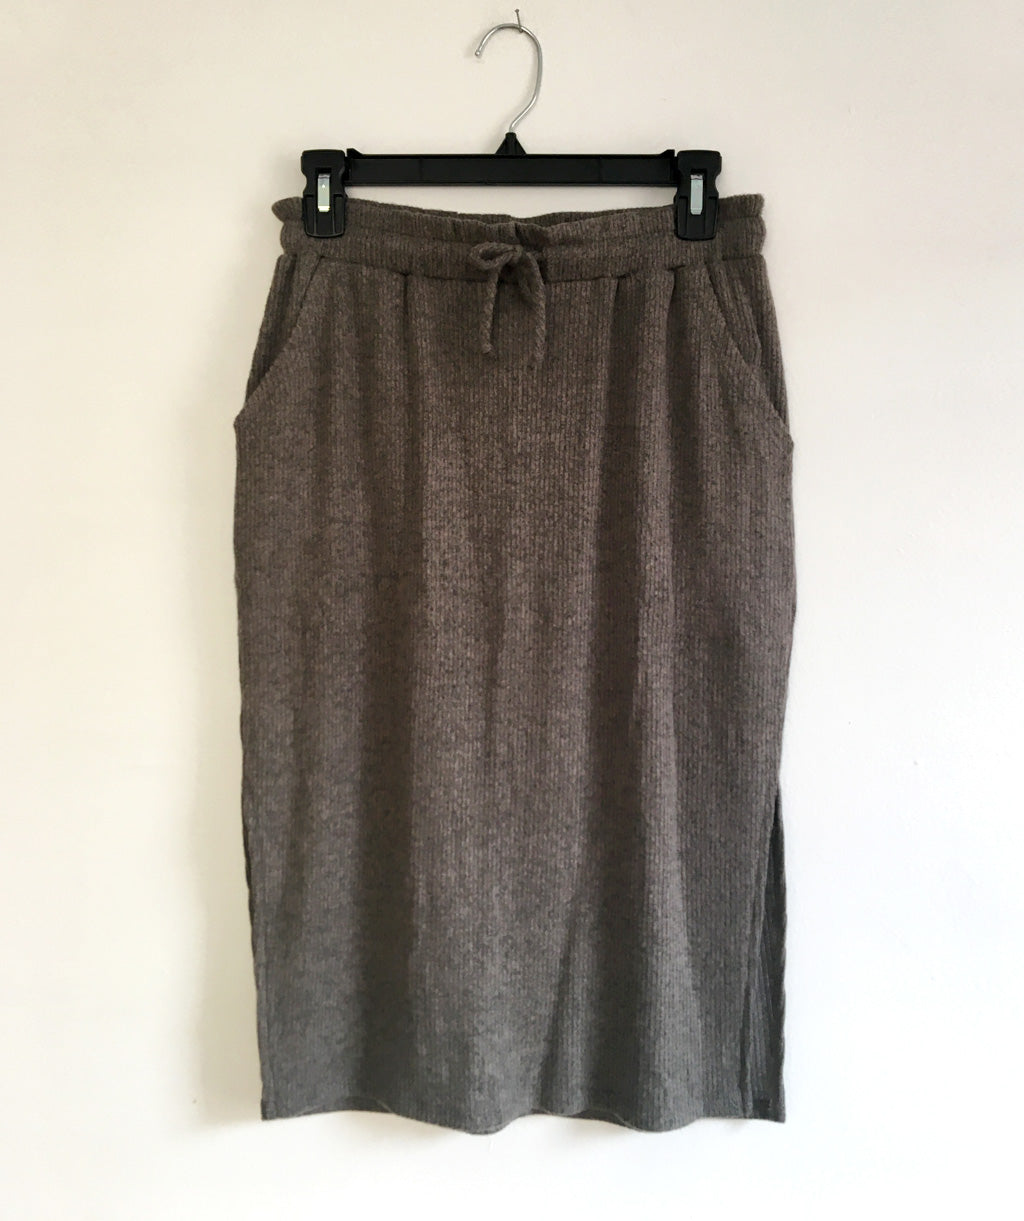 CITY sweater knit skirt in Dark Sage<br/>(Less than perfect)